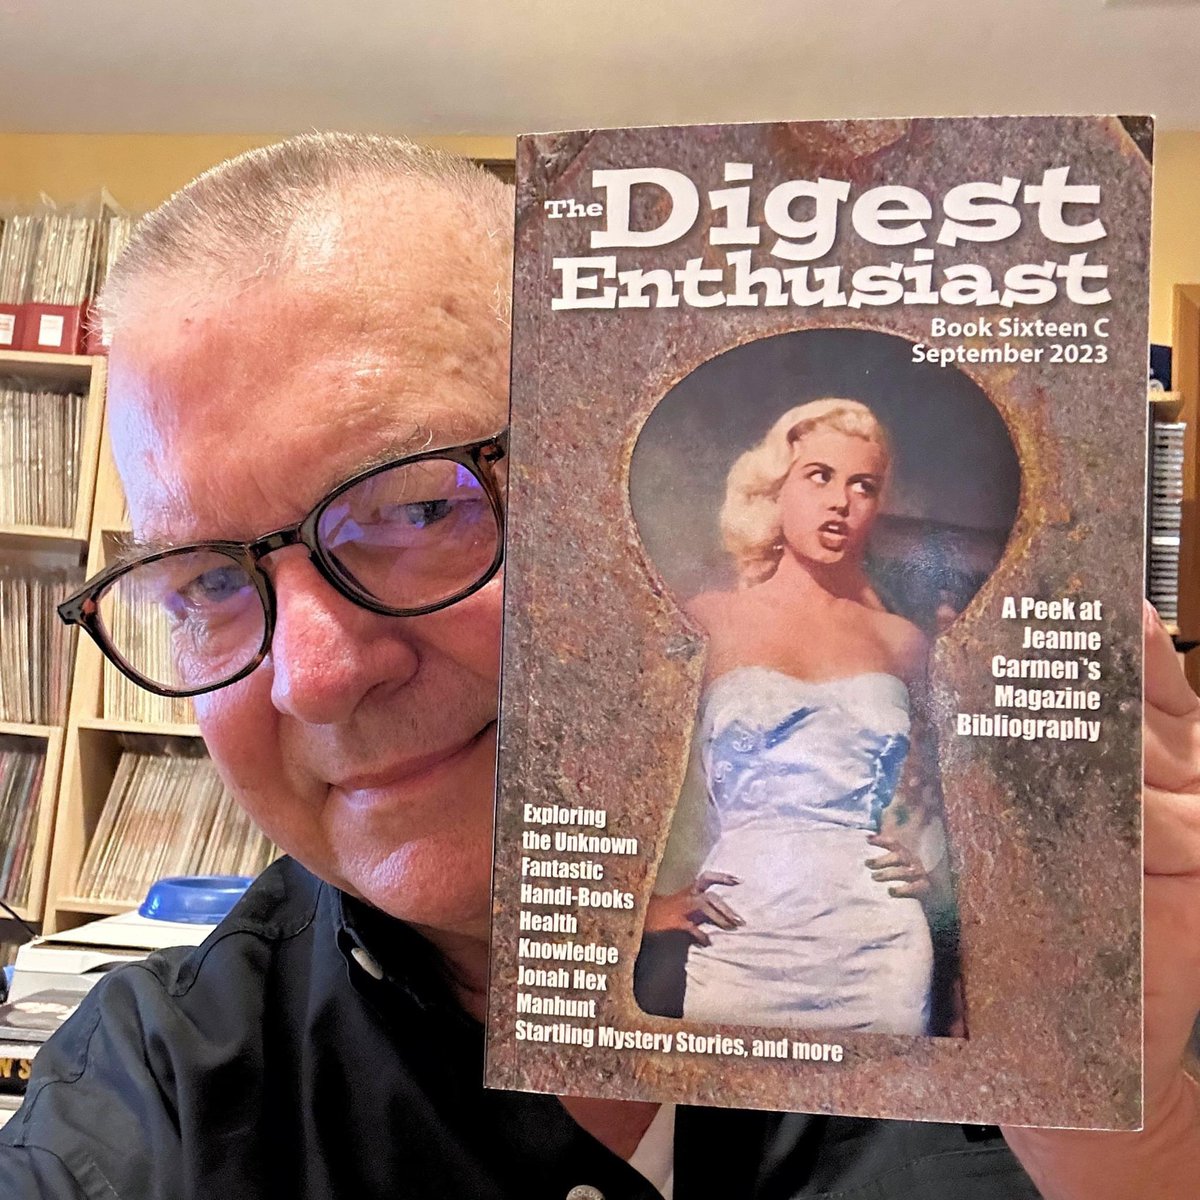 I just got the latest issues of THE DIGEST ENTHUSIAST (amzn.to/3OL85XD) and highly recommend it. As always, this issue includes well-researched, nicely-illustrated articles by guys who really know their stuff when it comes to vintage magazines and related retromedia.